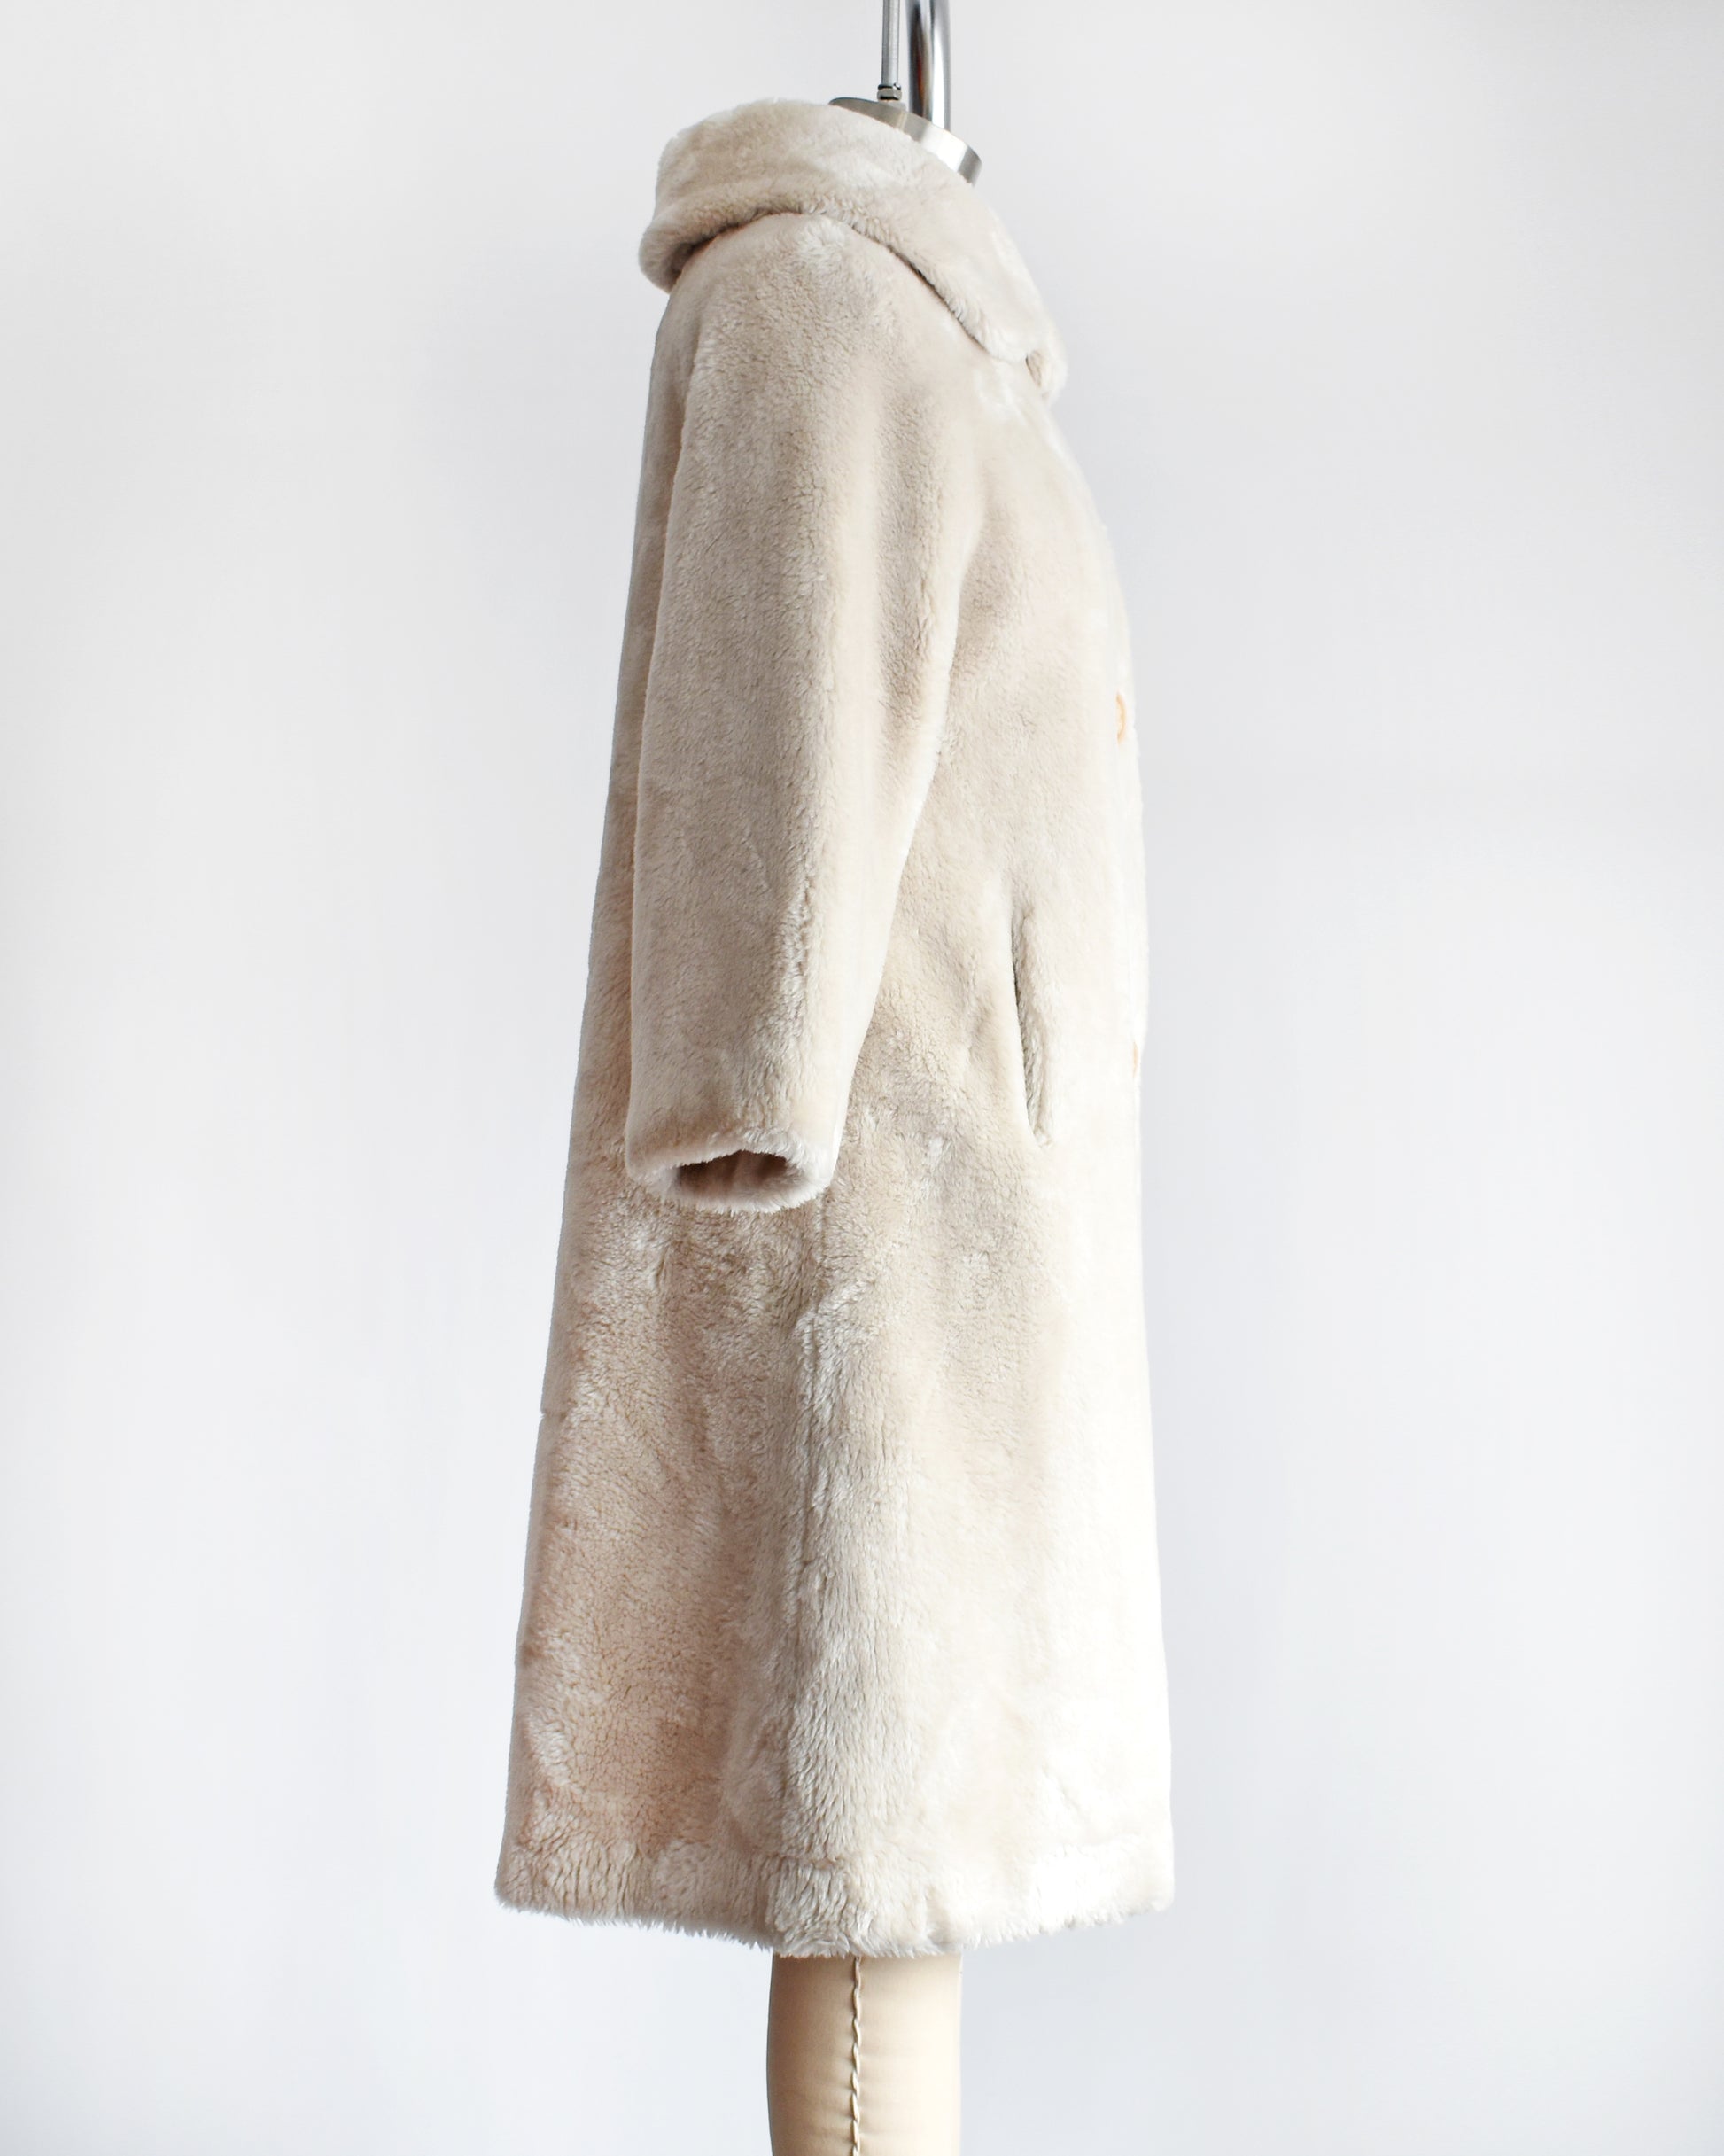 Side view of a vintage 1960s plush cream faux fur coat that features a Peter Pan style collar and three large buttons down the front